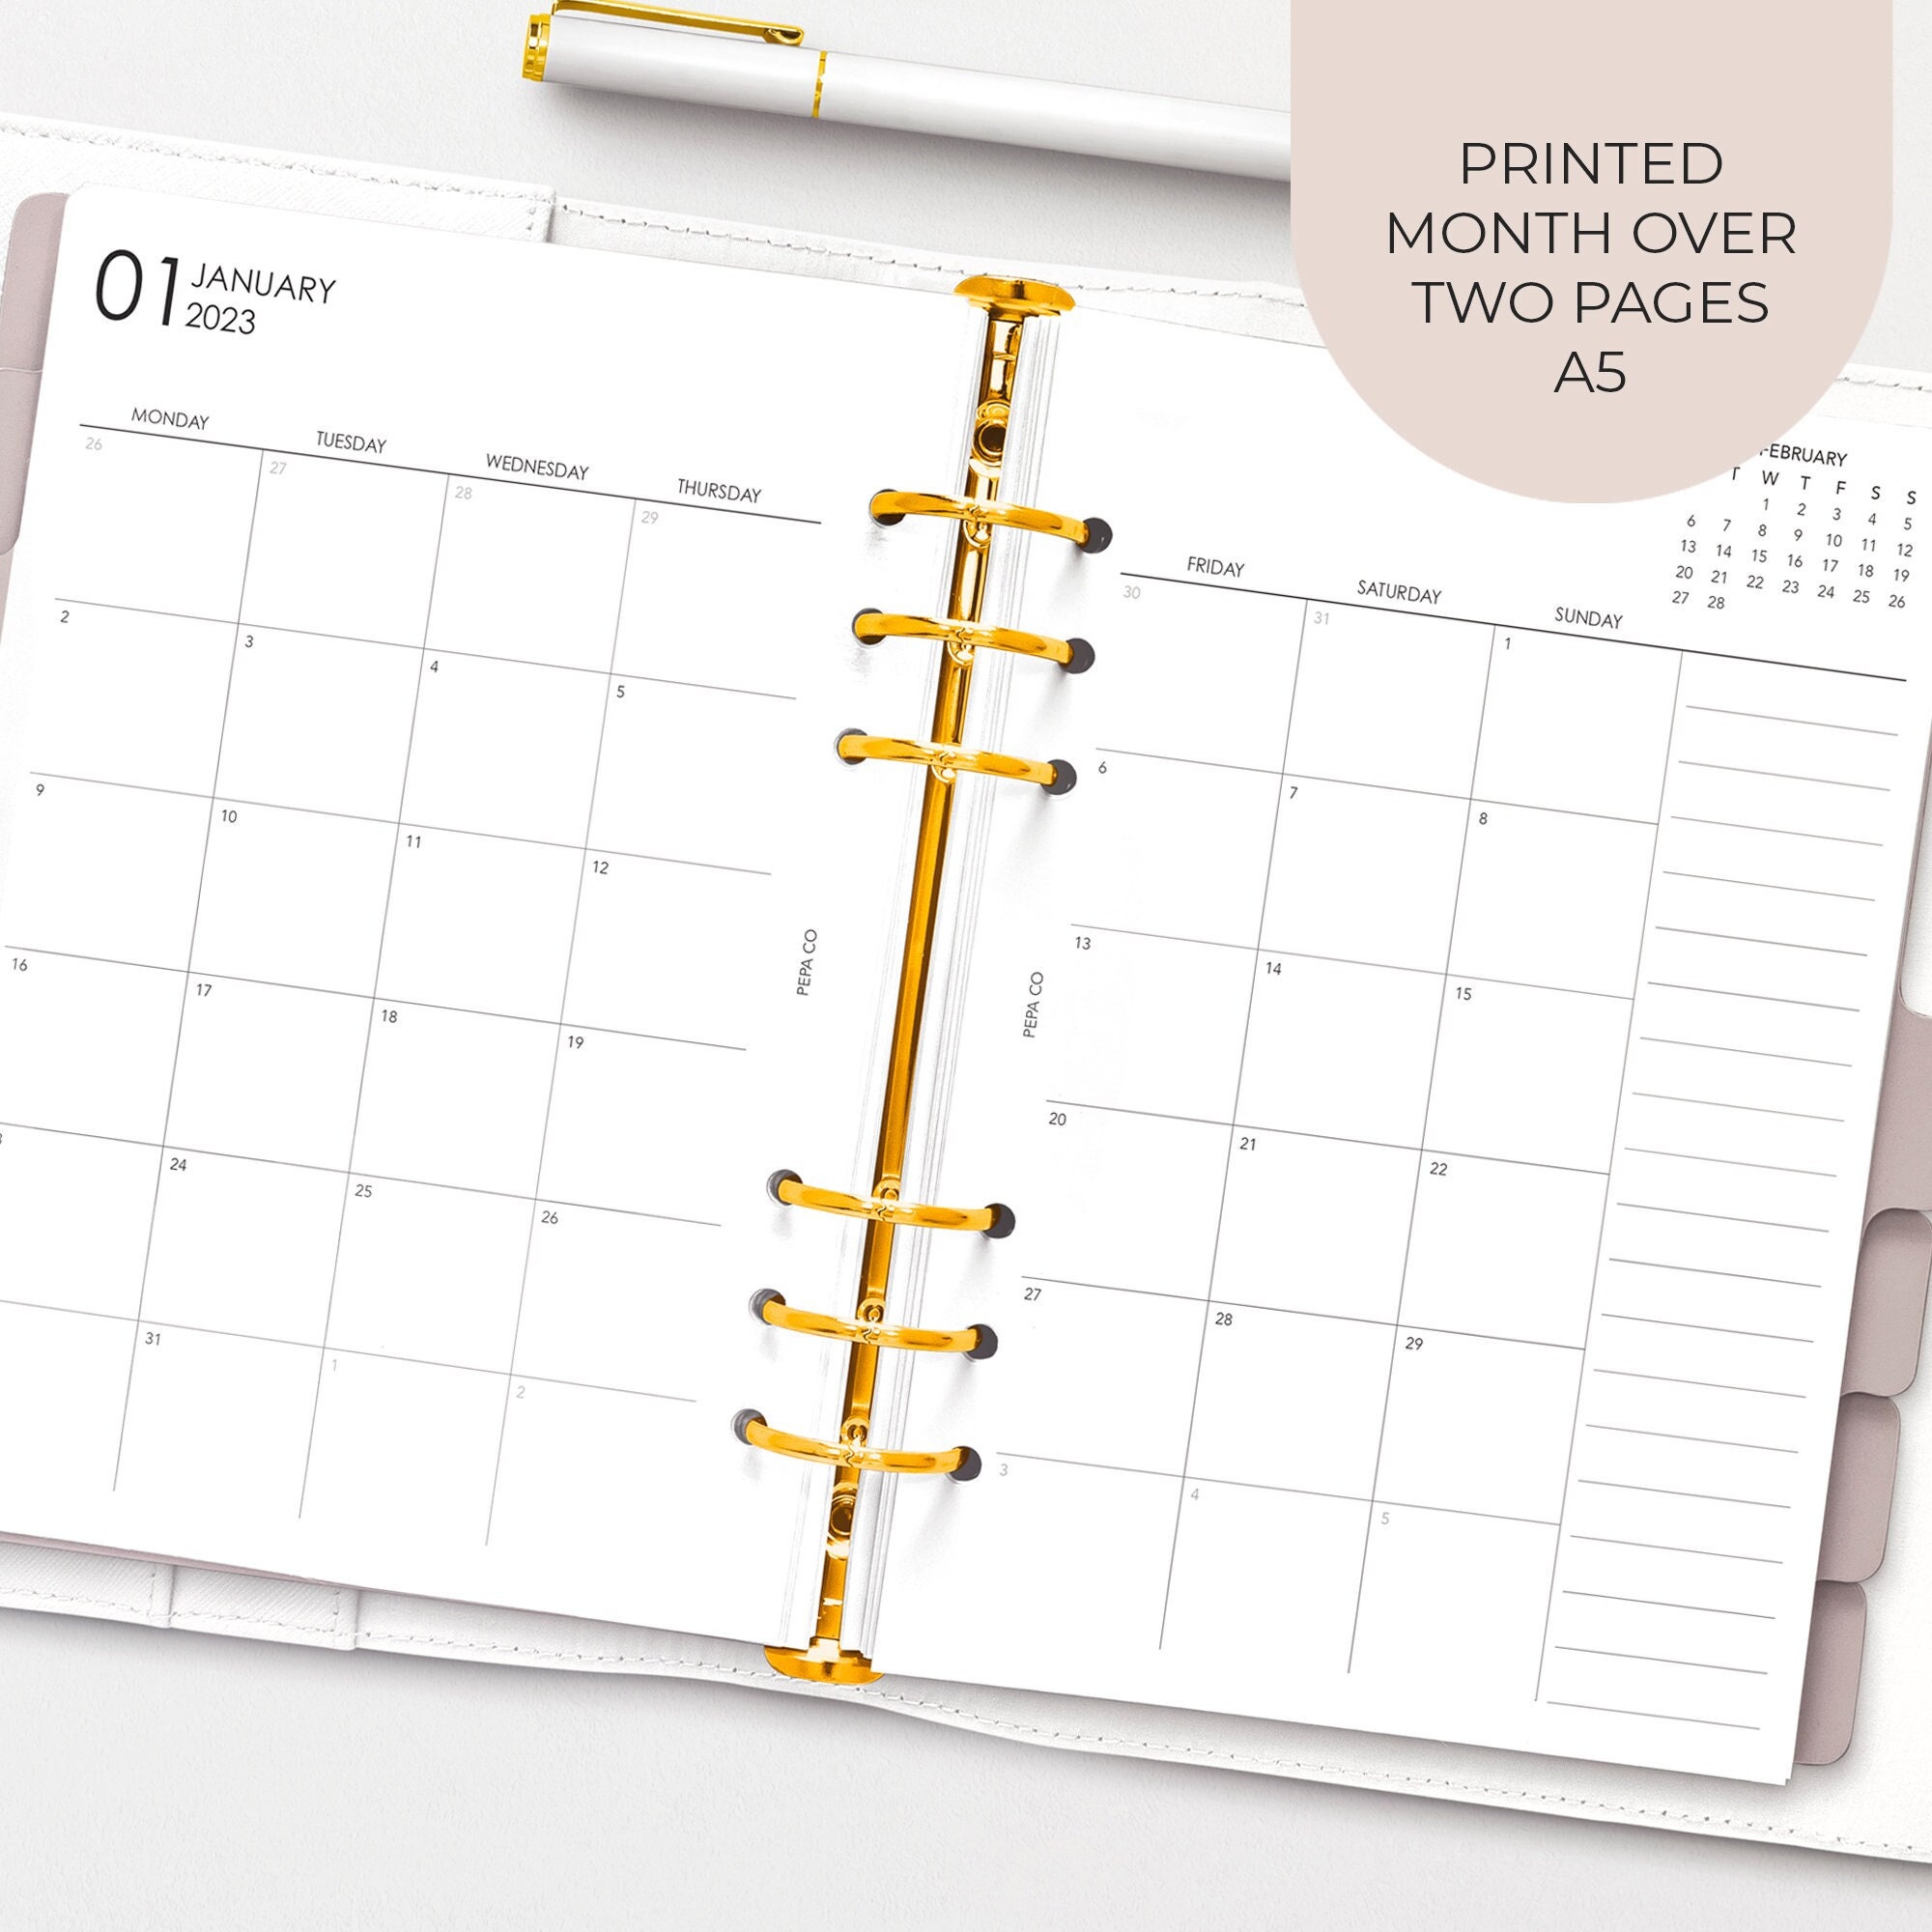 A5 Planner Inserts Daily Planner Printable A5 Filofax, A5 Planner Refill, Filofax  Refill, A5 Planner Pages, Day Planner, Daily Agenda 